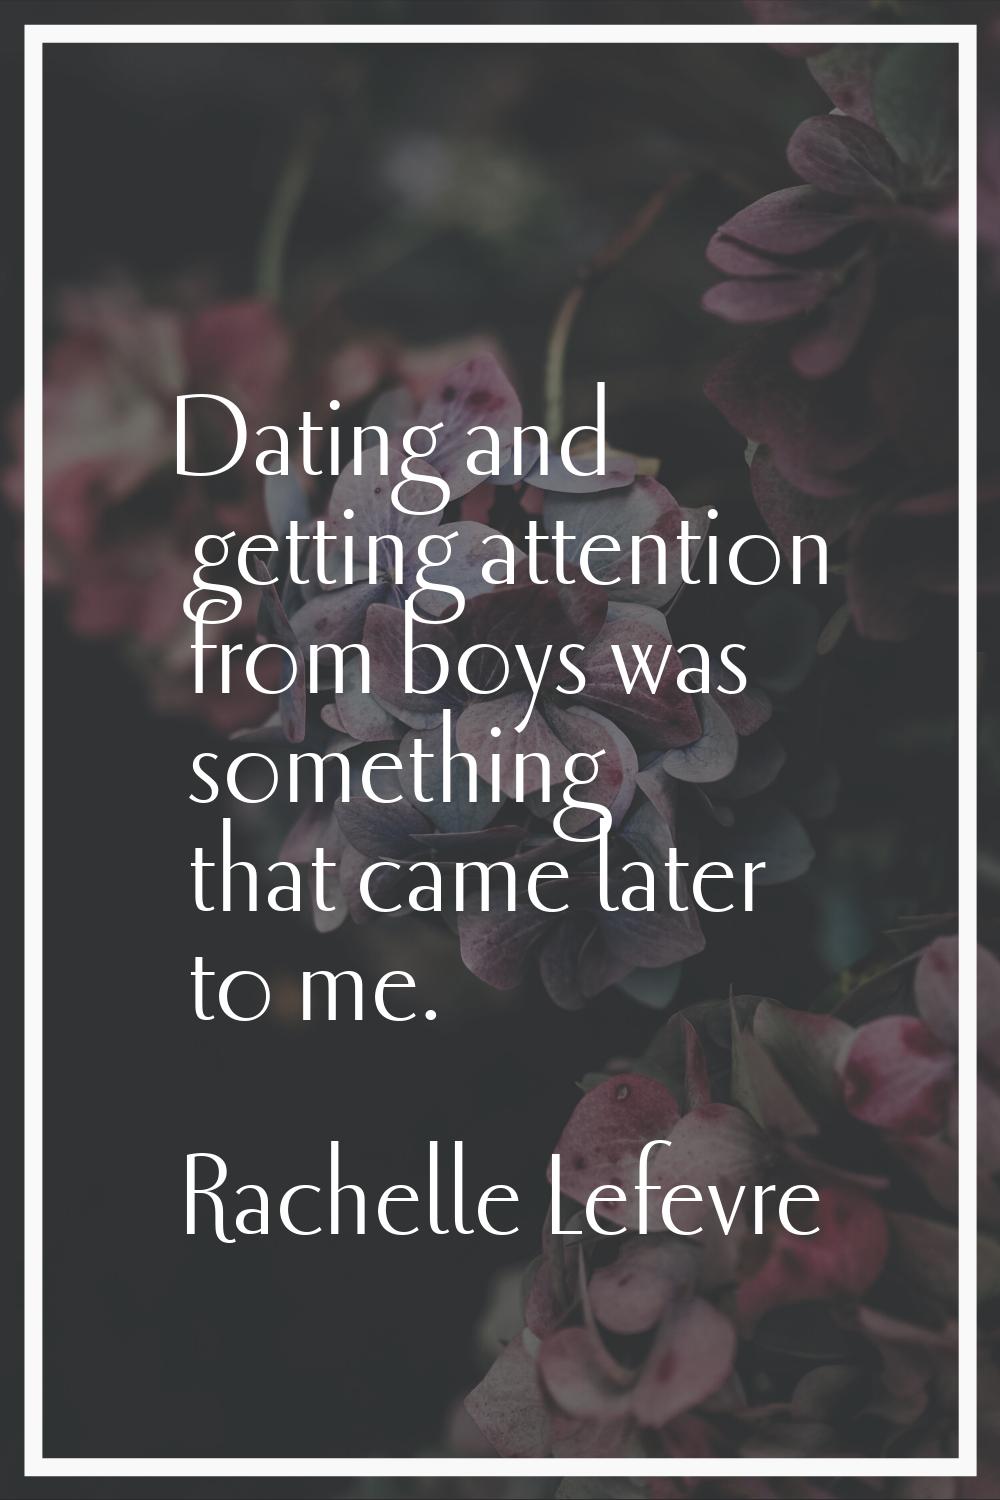 Dating and getting attention from boys was something that came later to me.